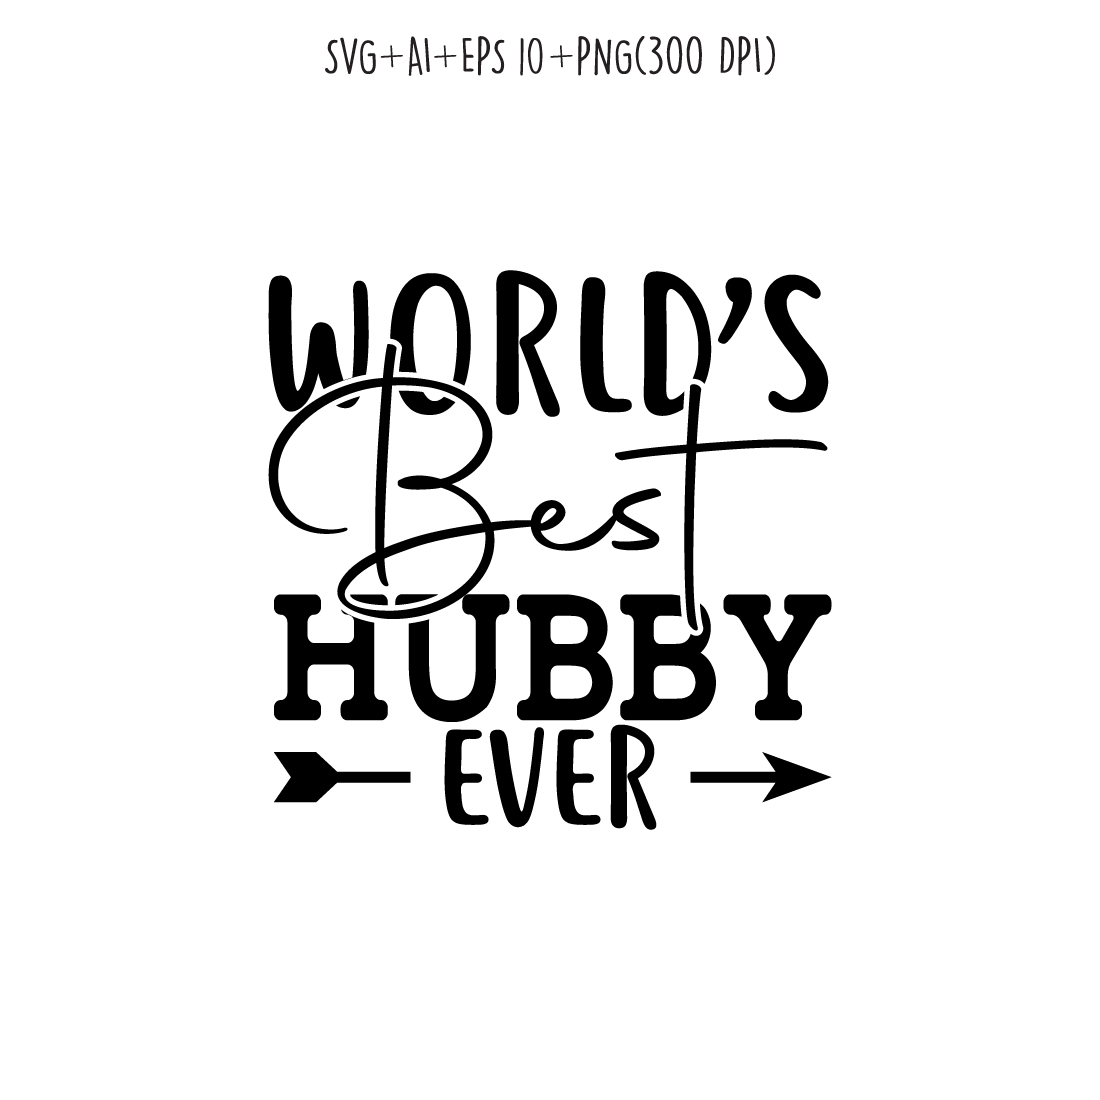 world's best hubby ever SVG design for t-shirts, cards, frame artwork, phone cases, bags, mugs, stickers, tumblers, print, etc preview image.